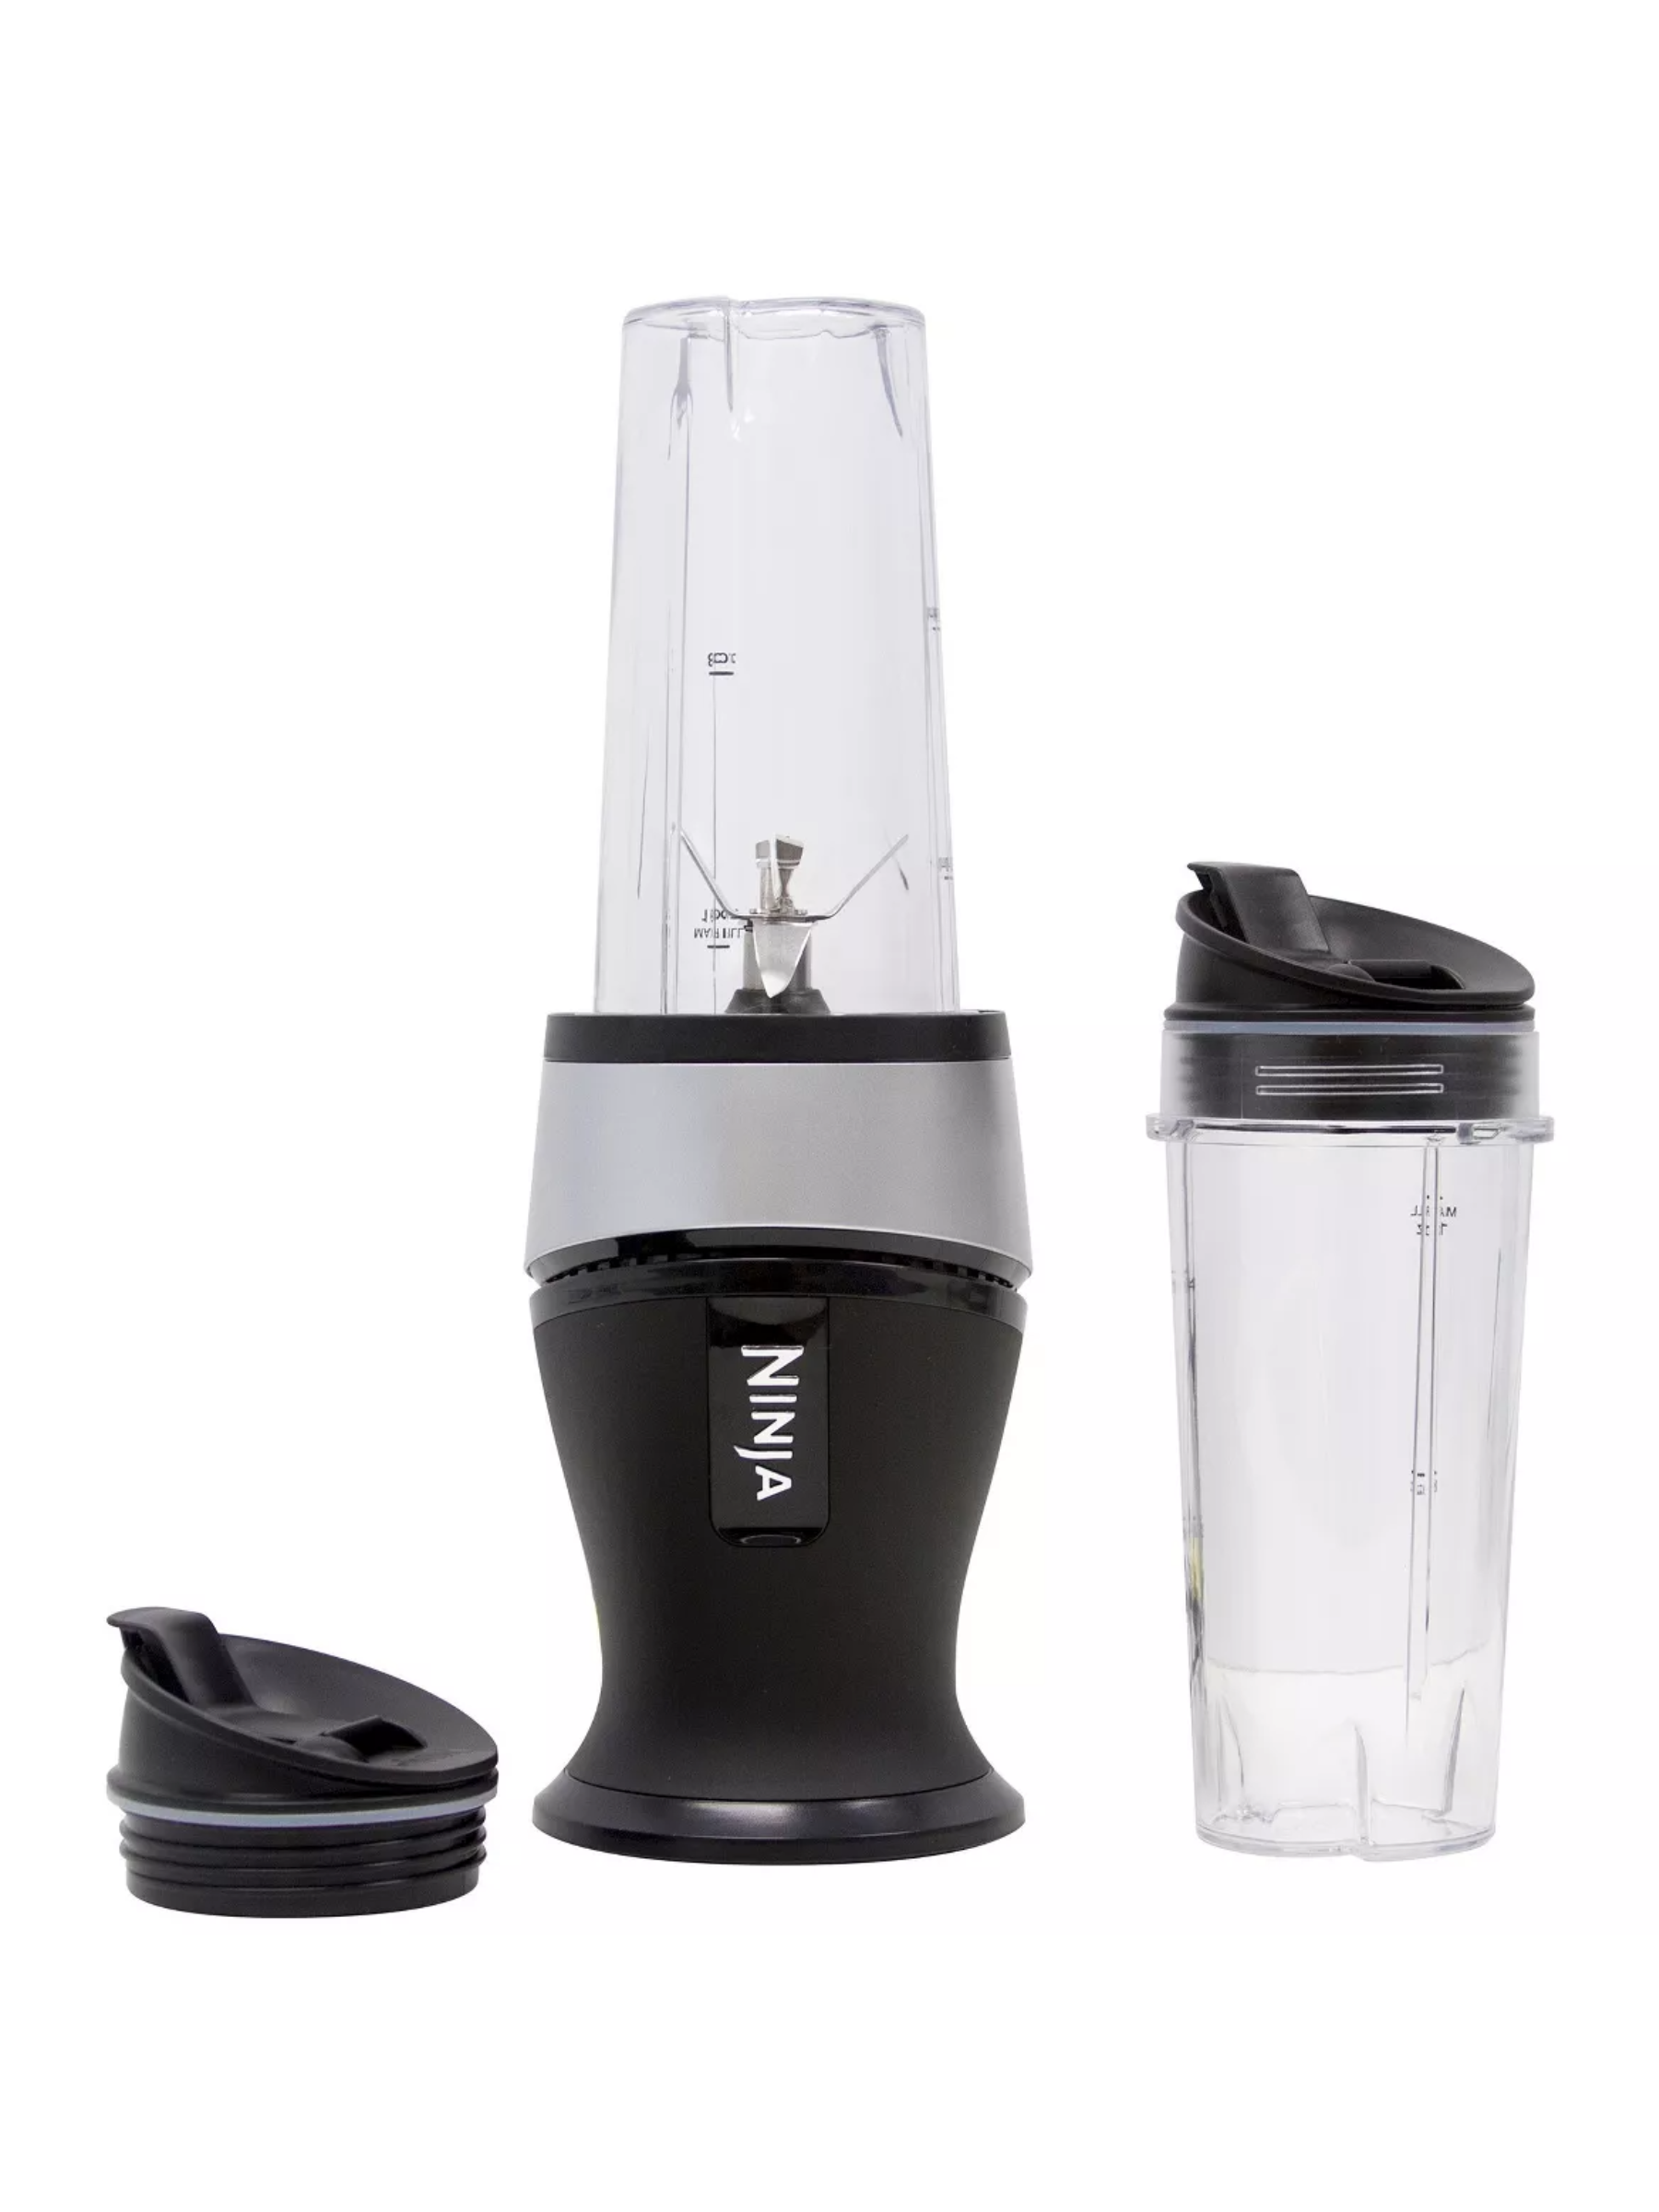 Whipping up smoothies before class is a breeze with a personal blender that comes with a spouted lid for sipping on-the-go. $59, Amazon. <a href="https://www.amazon.com/Ninja-Personal-Smoothies-Blending-700-Watt/dp/B01FHOWYA2?">Get it now!</a><p>Sign up for today’s biggest stories, from pop culture to politics.</p><a href="https://www.glamour.com/newsletter/news?sourceCode=msnsend">Sign Up</a>